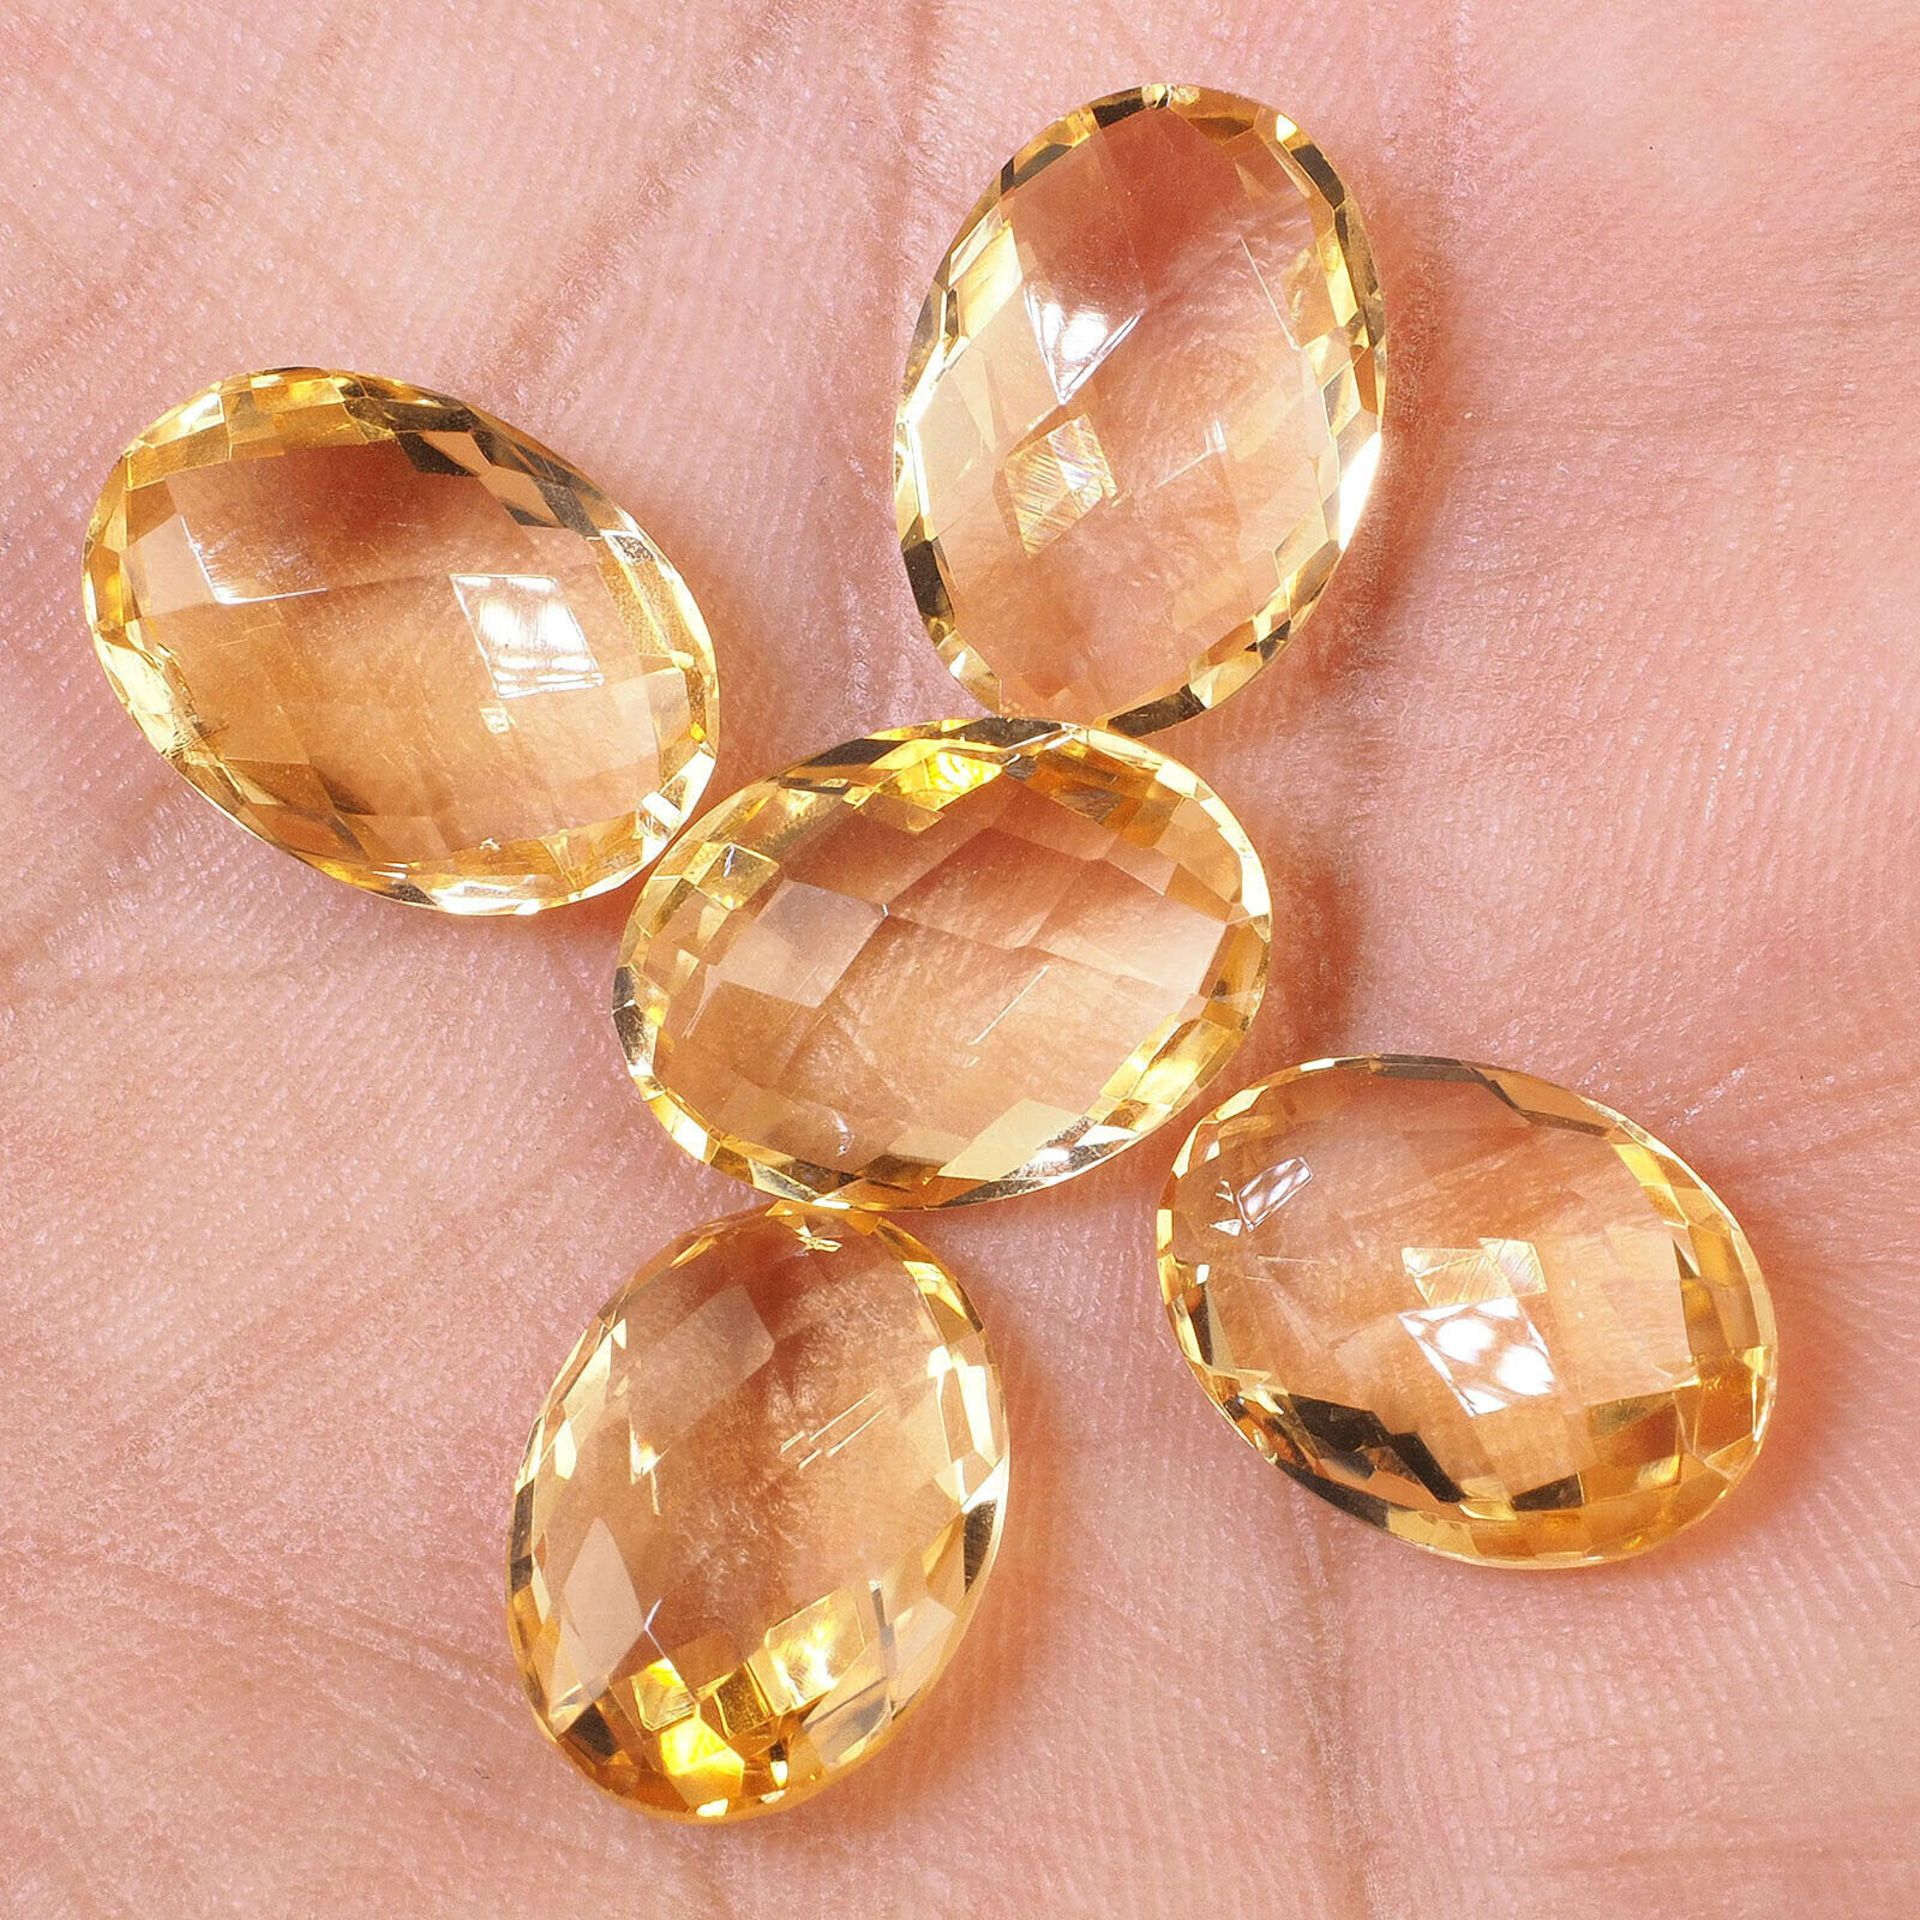 Natural Citrine 27.75 carat 5 pieces, This glorious collection of Natural Citrine is VVS- IF clarity